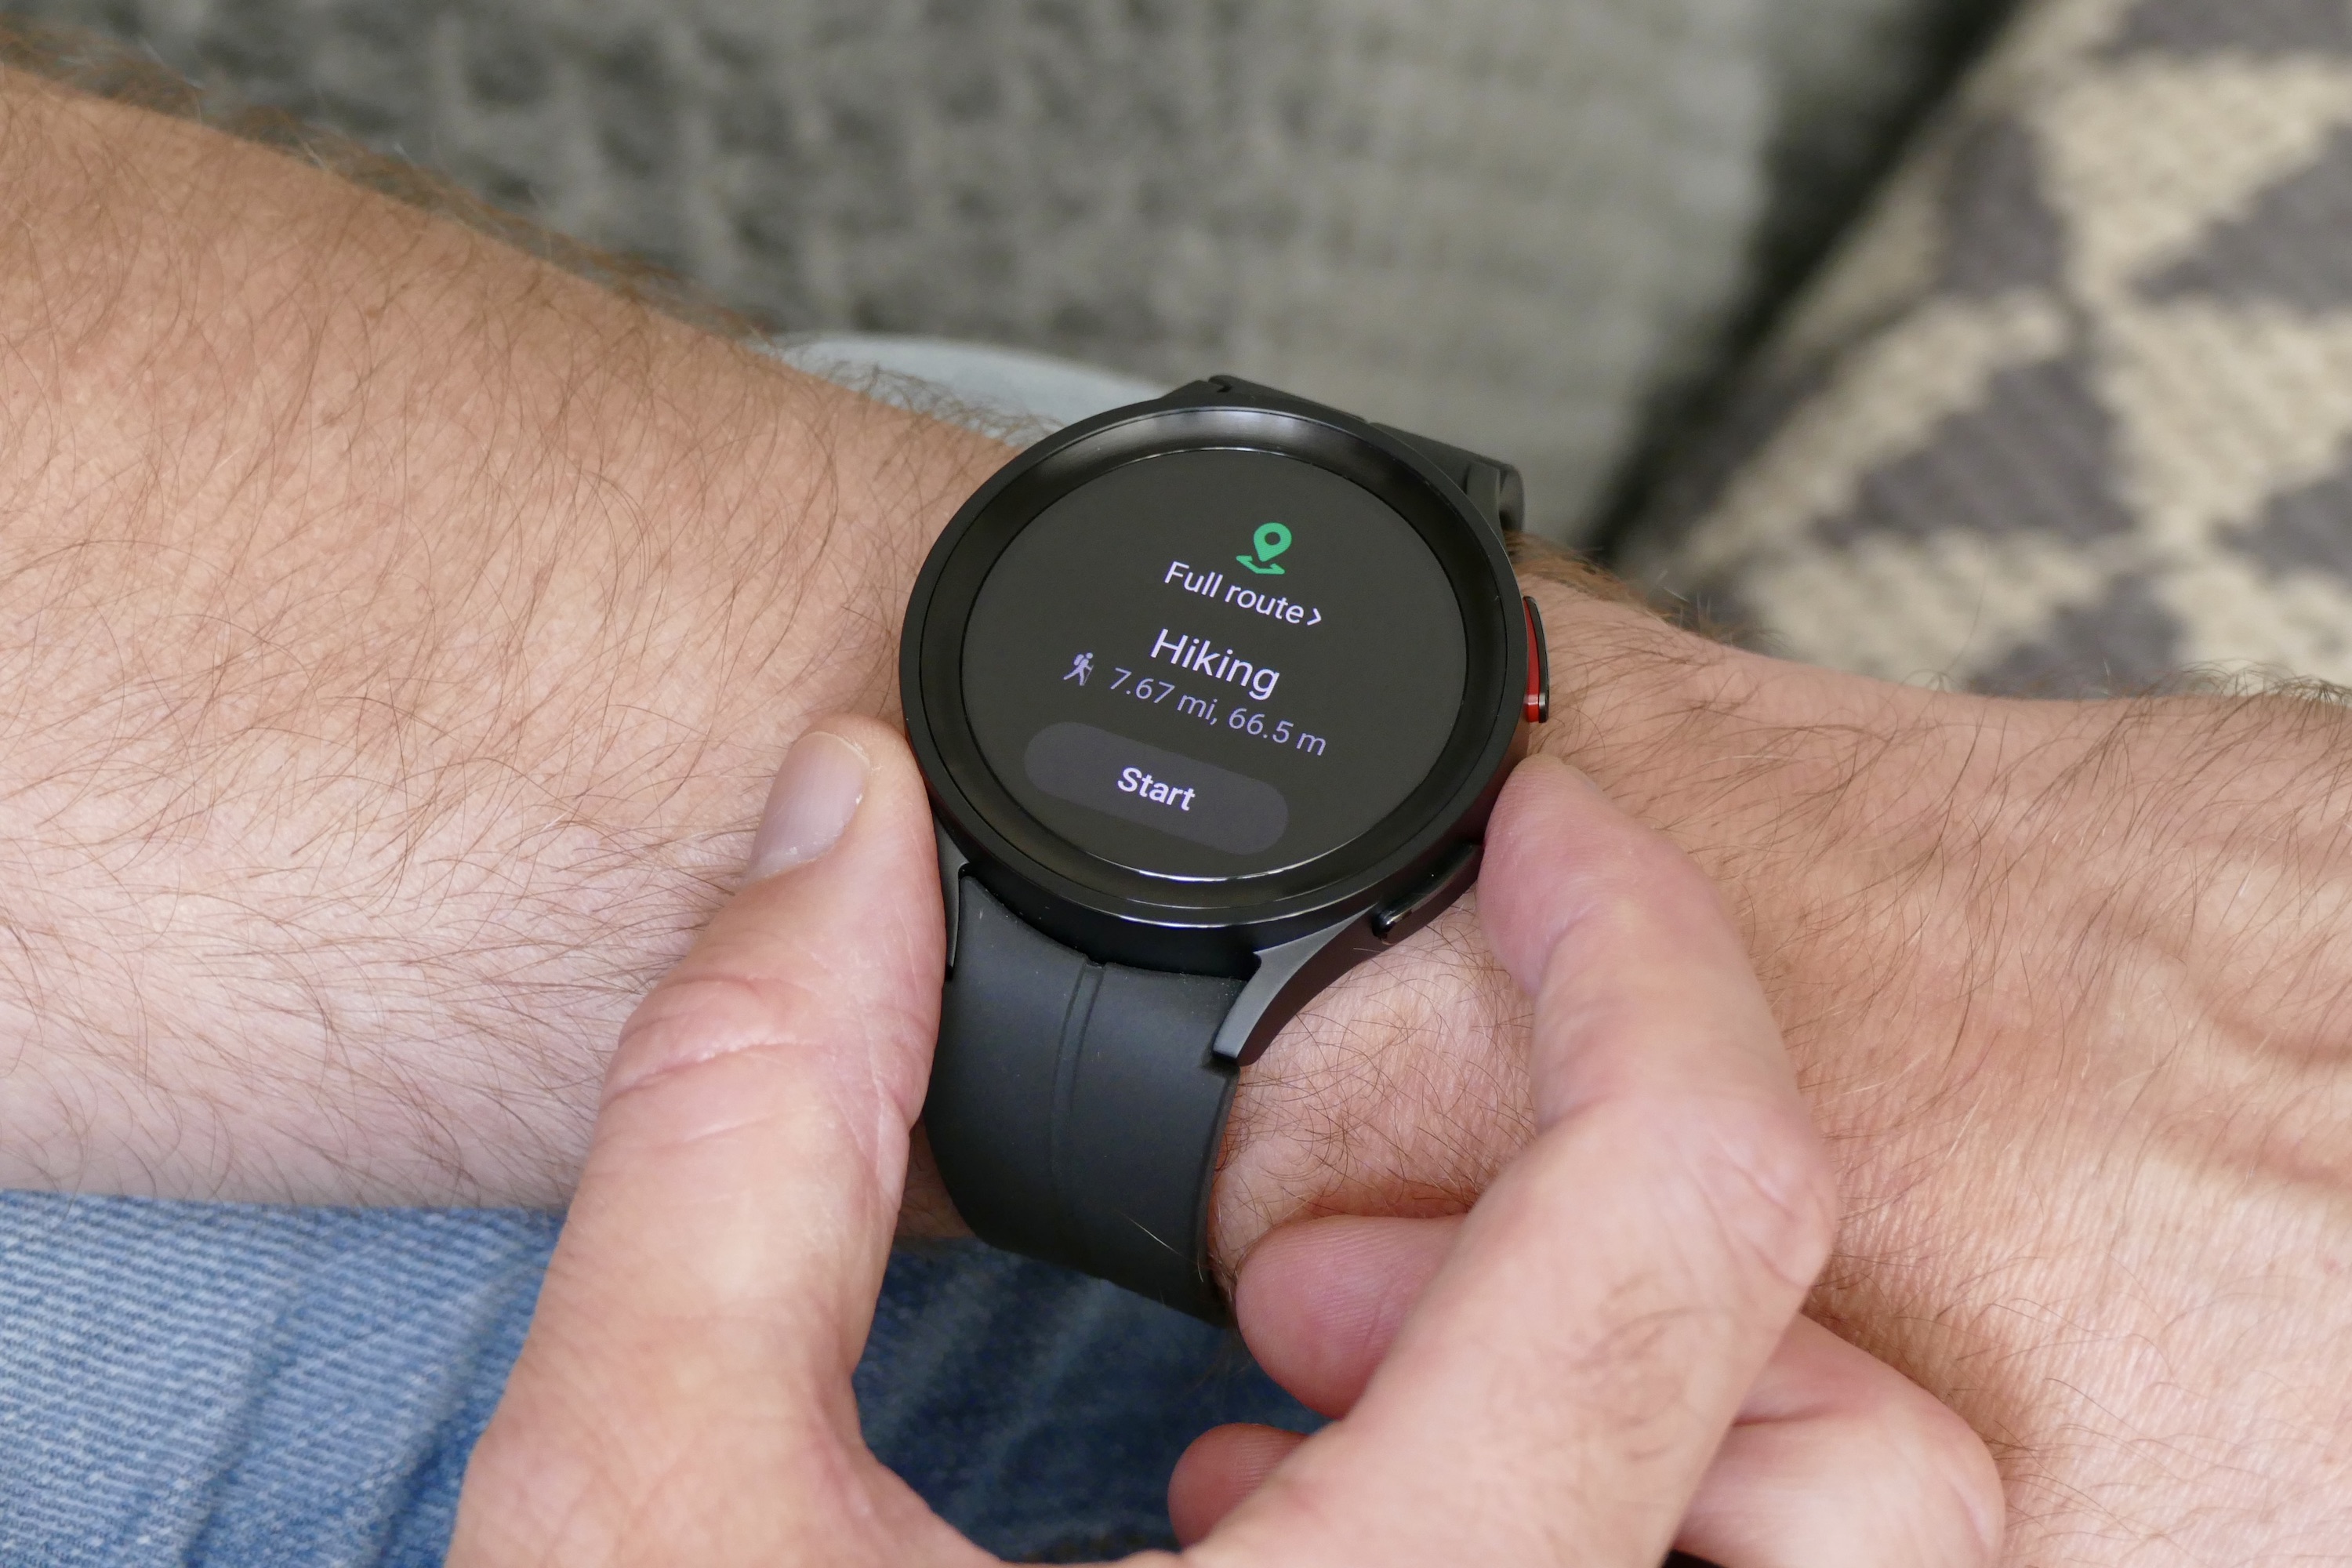 Samsung Galaxy Watch 5 Pro review: Not the latest but still the